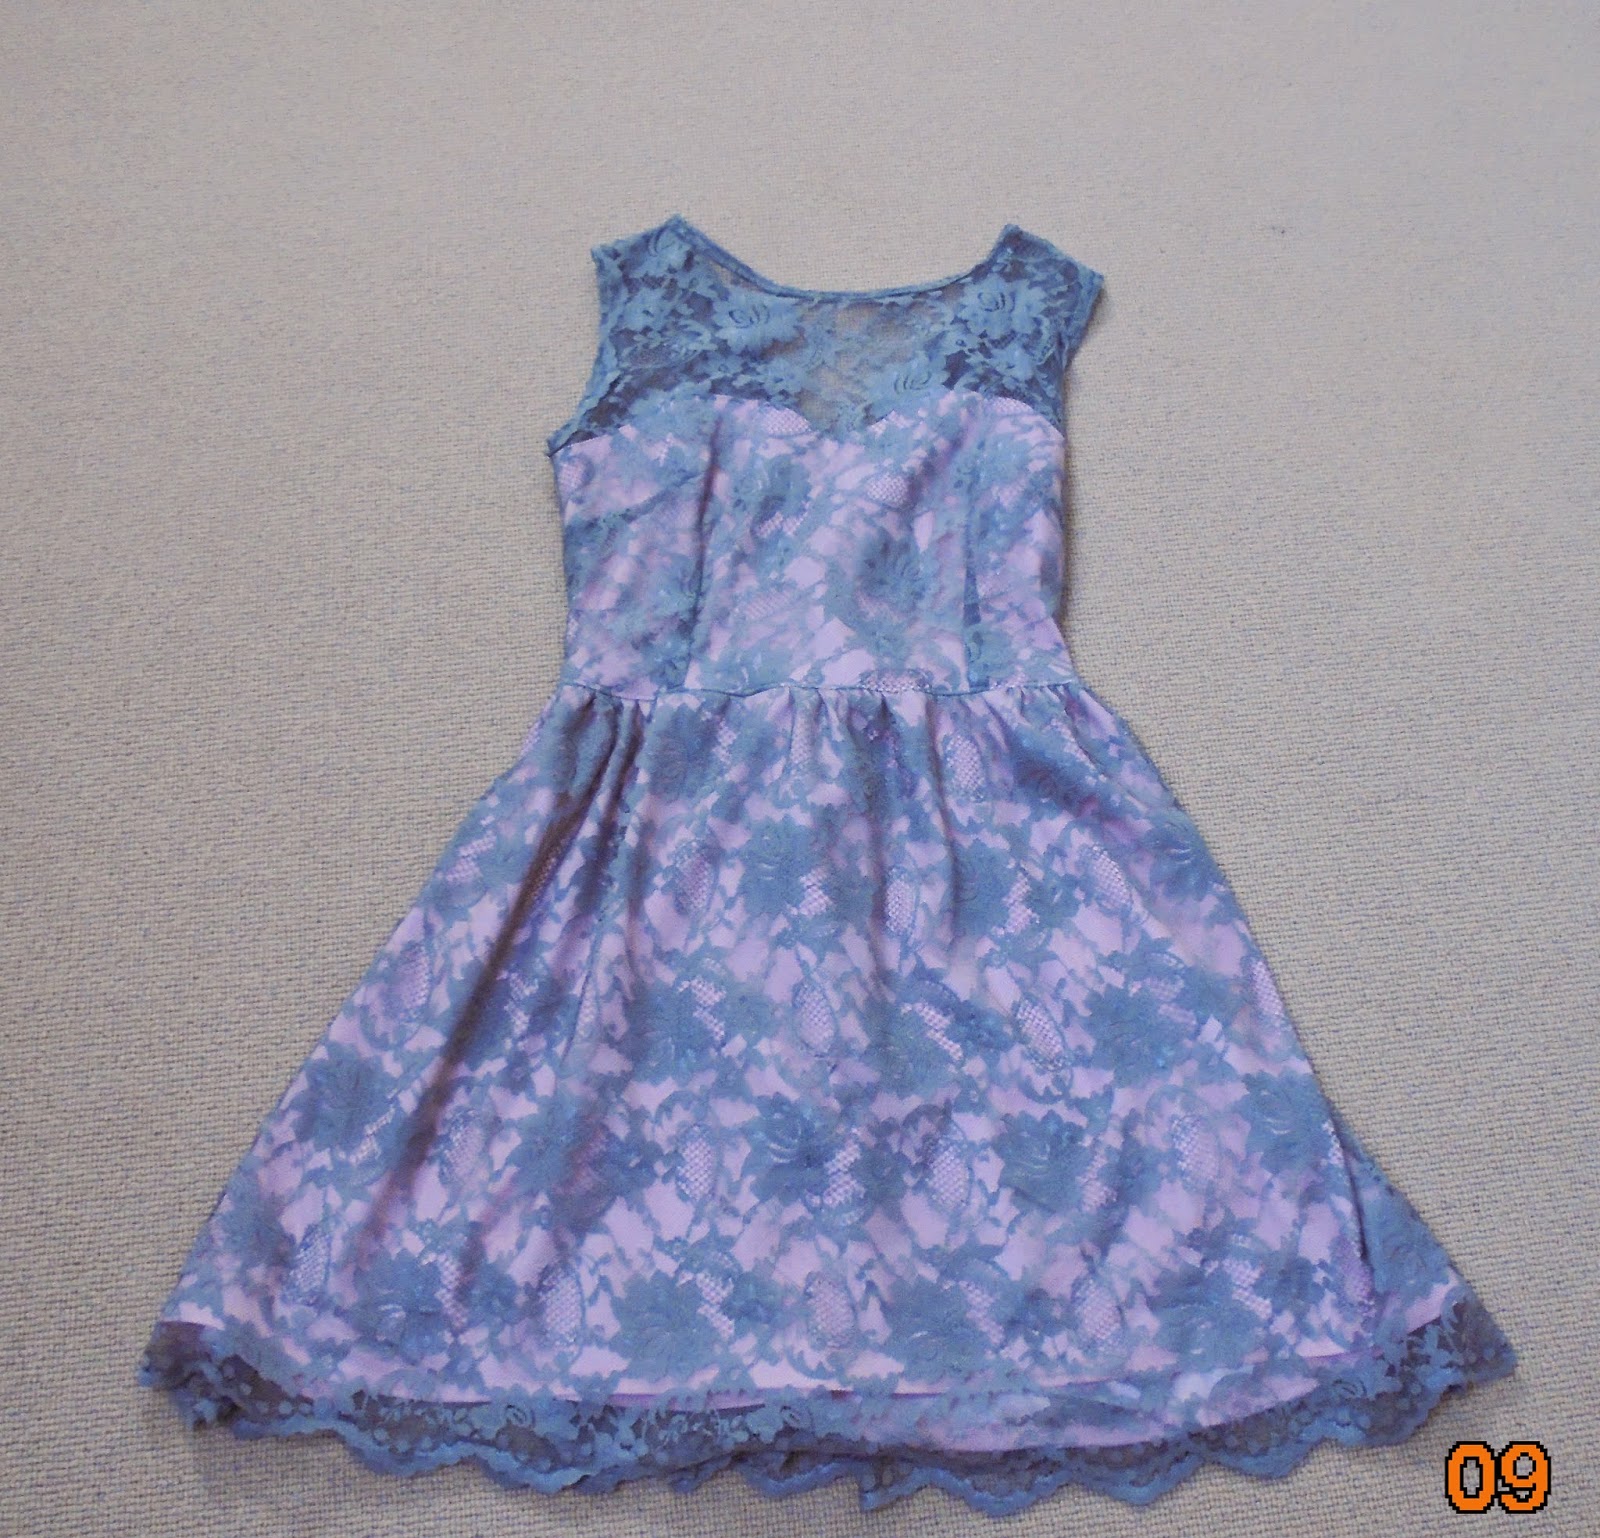 Not Sew Unseamly...: The dress!